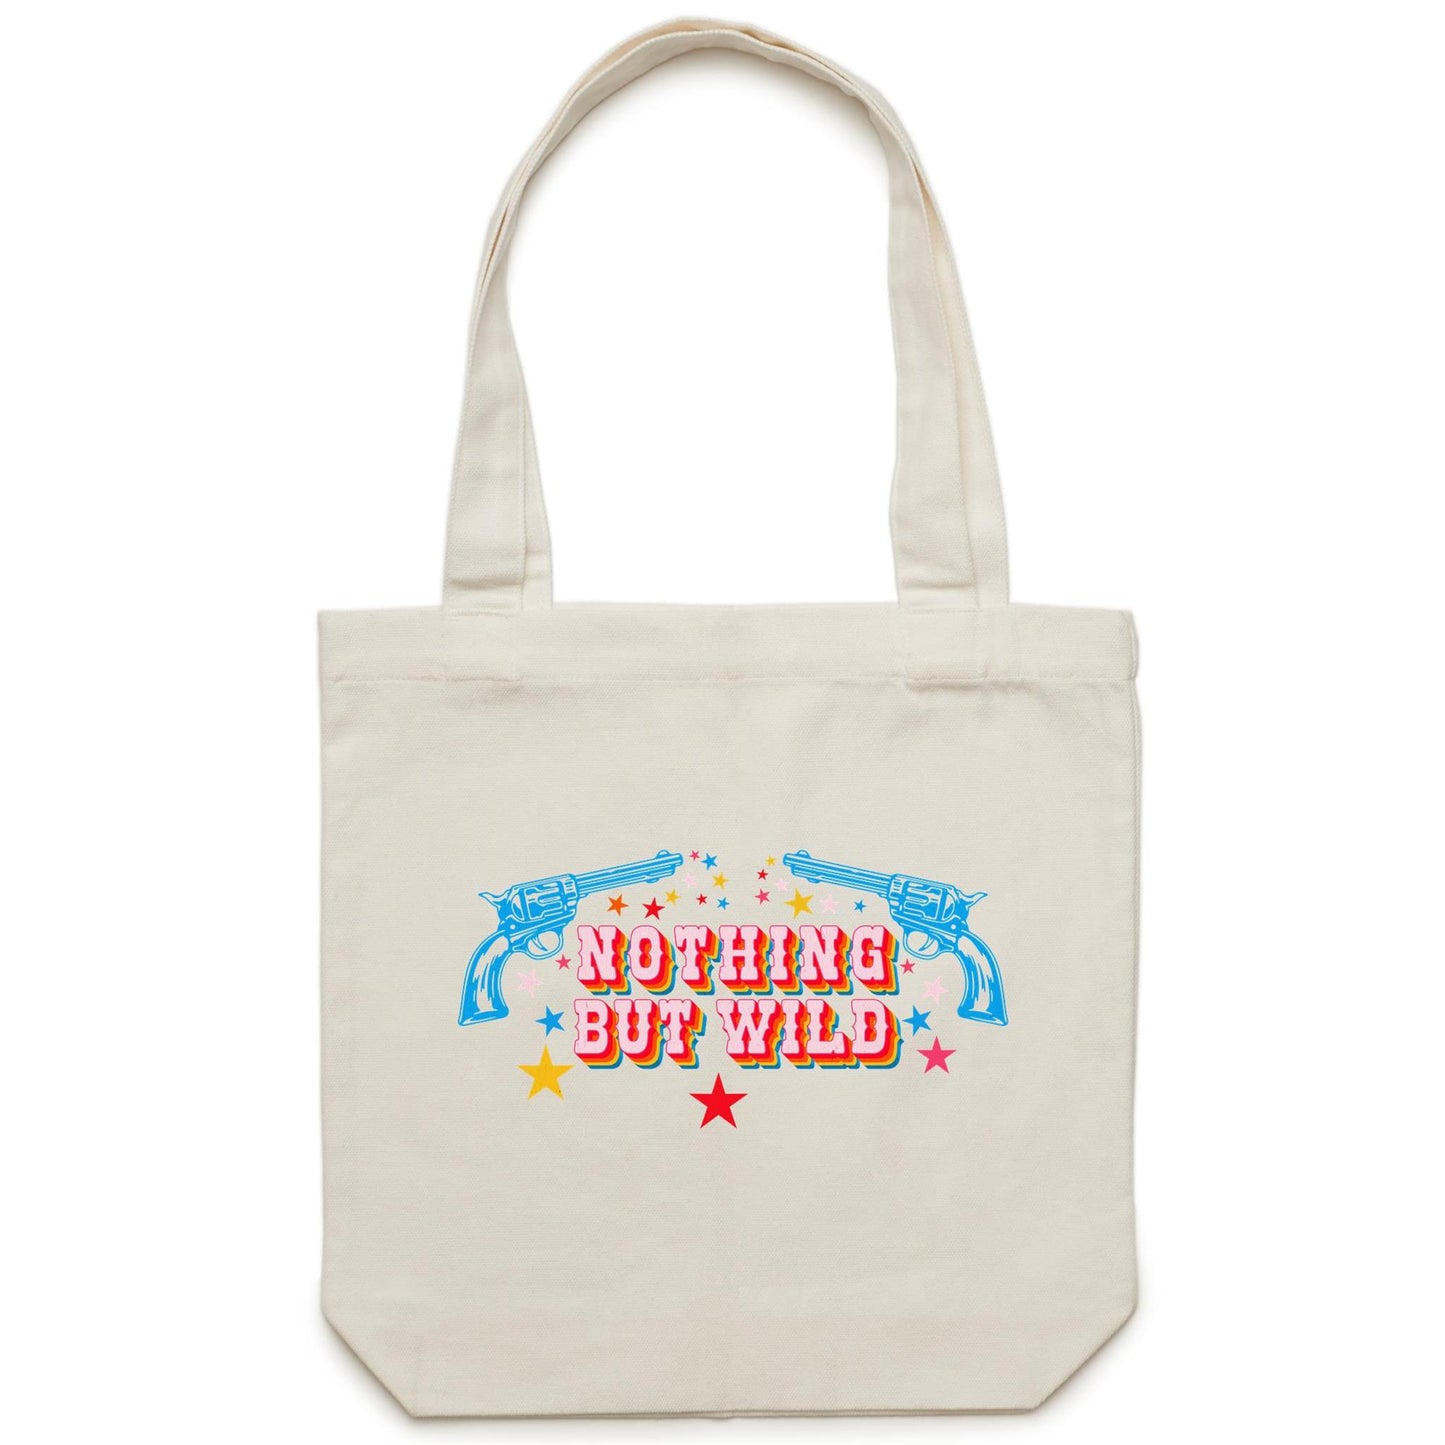 Nothing But Wild - Tote Bag